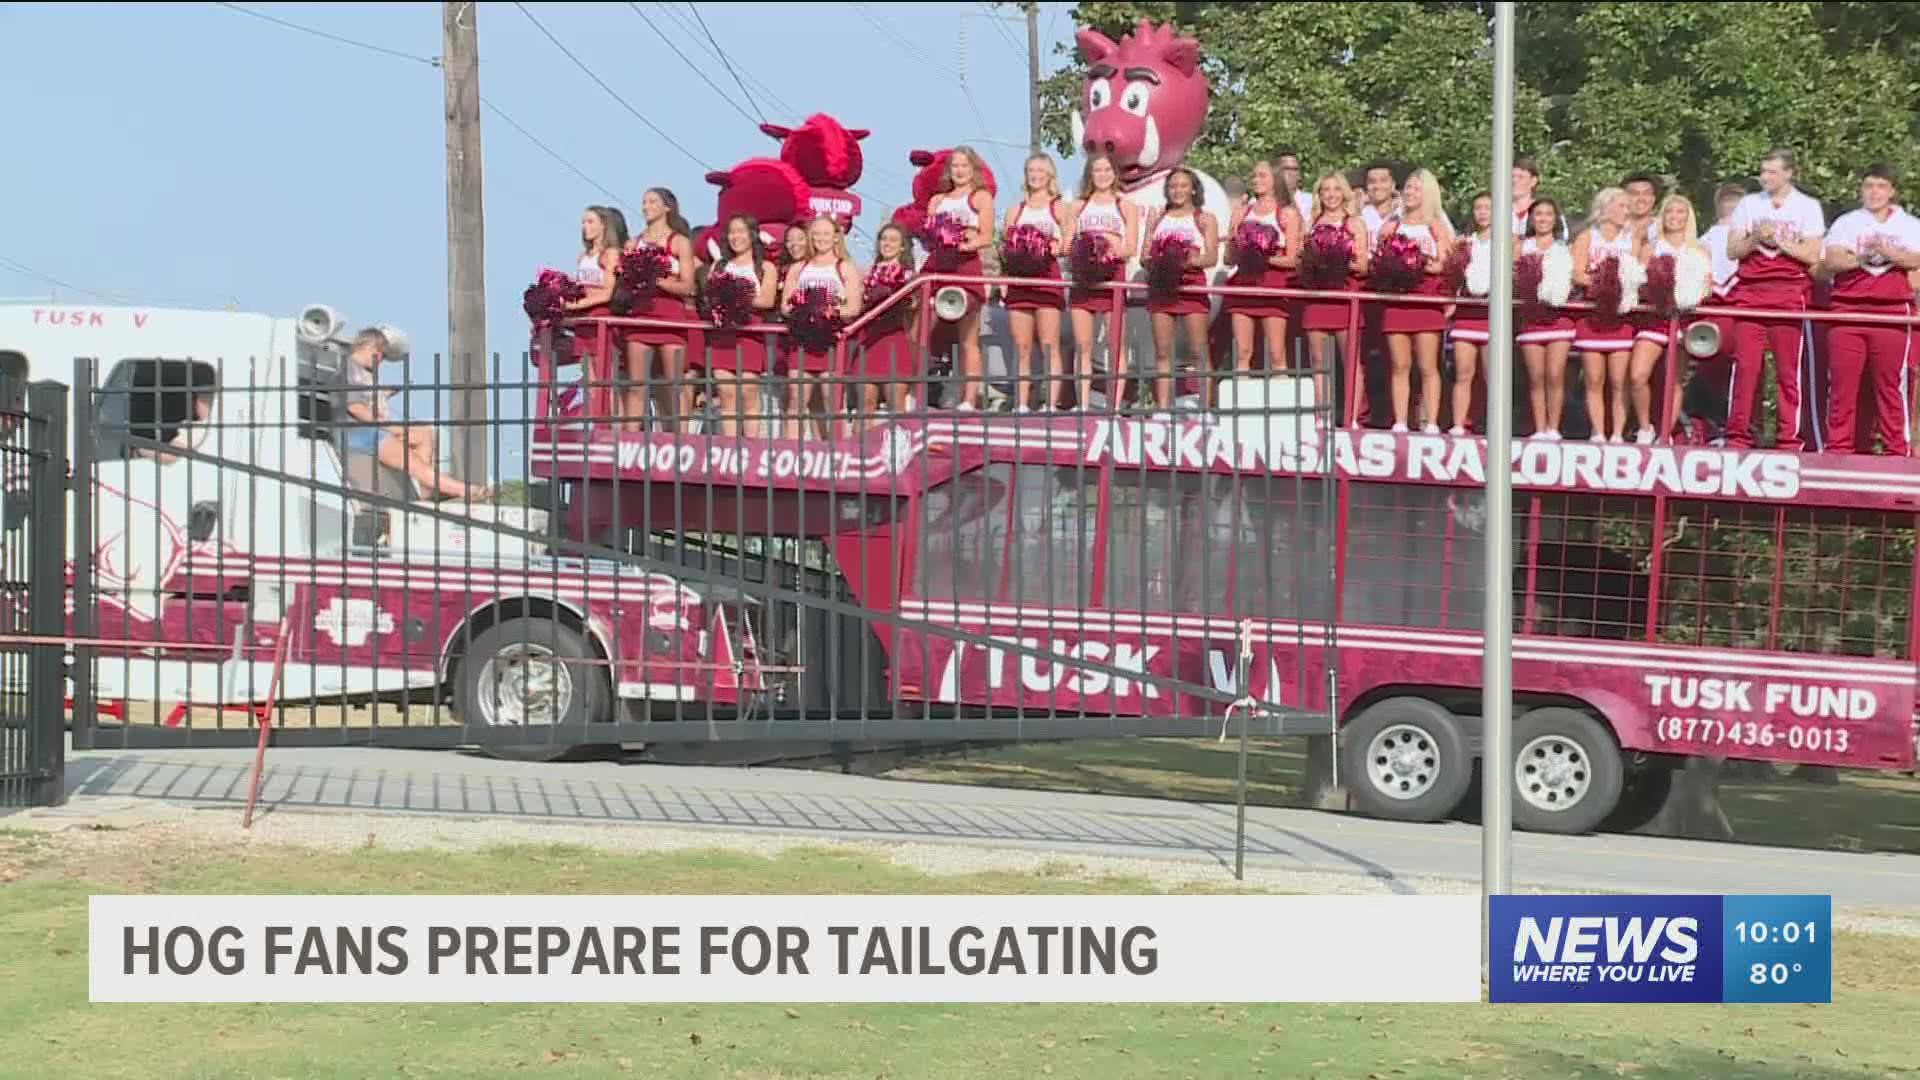 Tailgating season has begun with fans claiming pre-game spots for the Razorback's season opener against Rice.